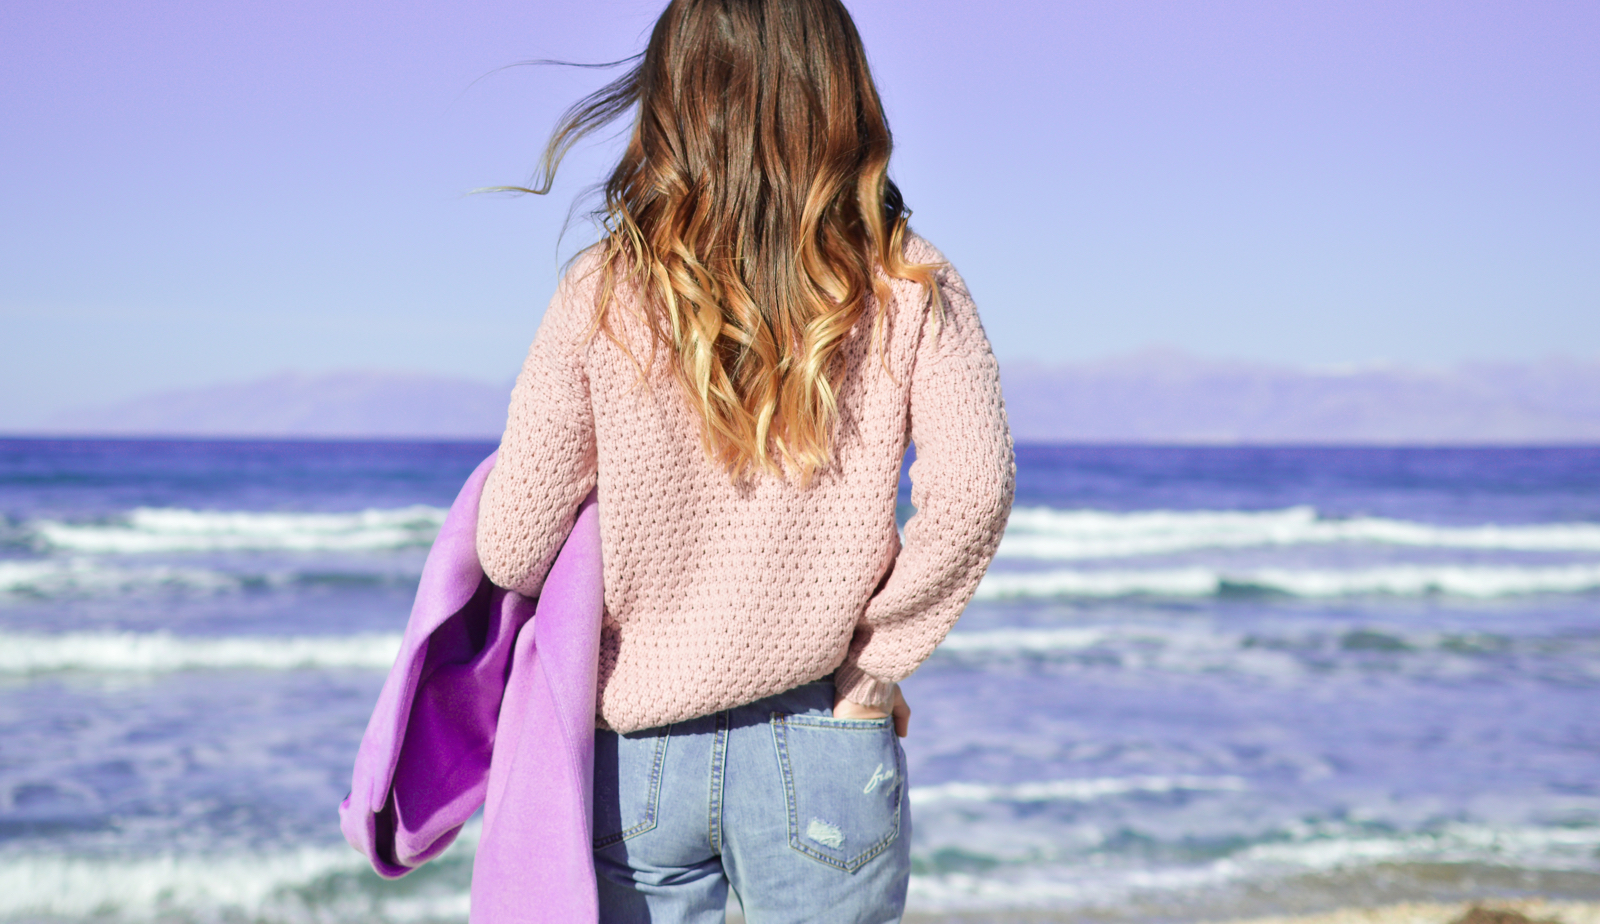 Woman with ombre hair wearing rose pink sweater holding lilac coloured sweater with one arm, other hand in pocket, looking out at the ocean